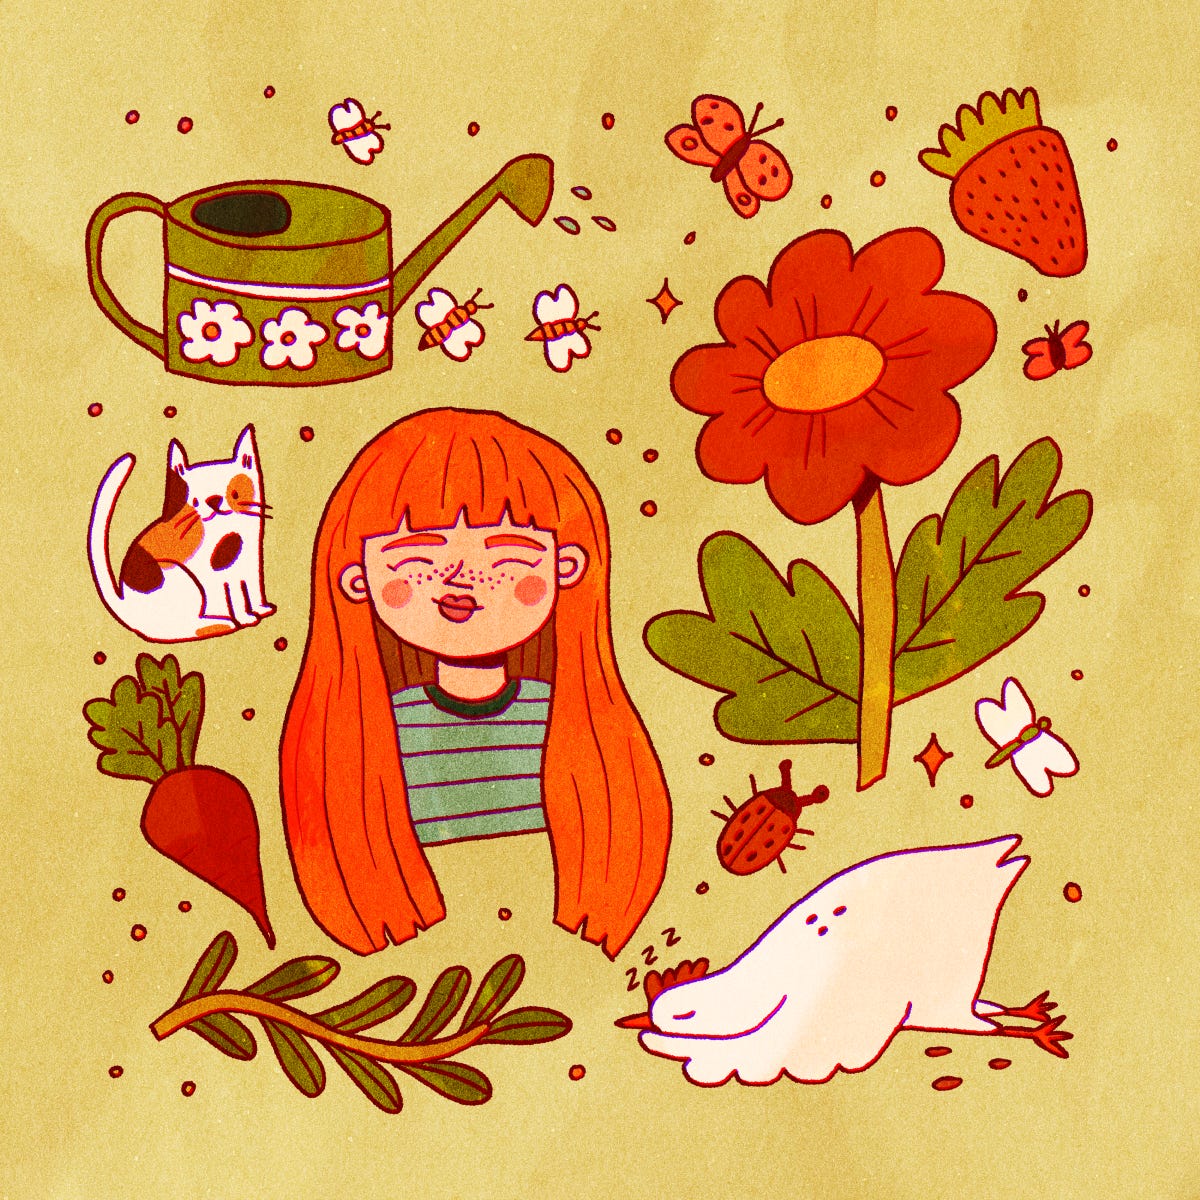 A digital drawing of a collection of things against a light green background: a watering can, flowers, a beet, a sleeping chicken, a happy cat and a girl character.